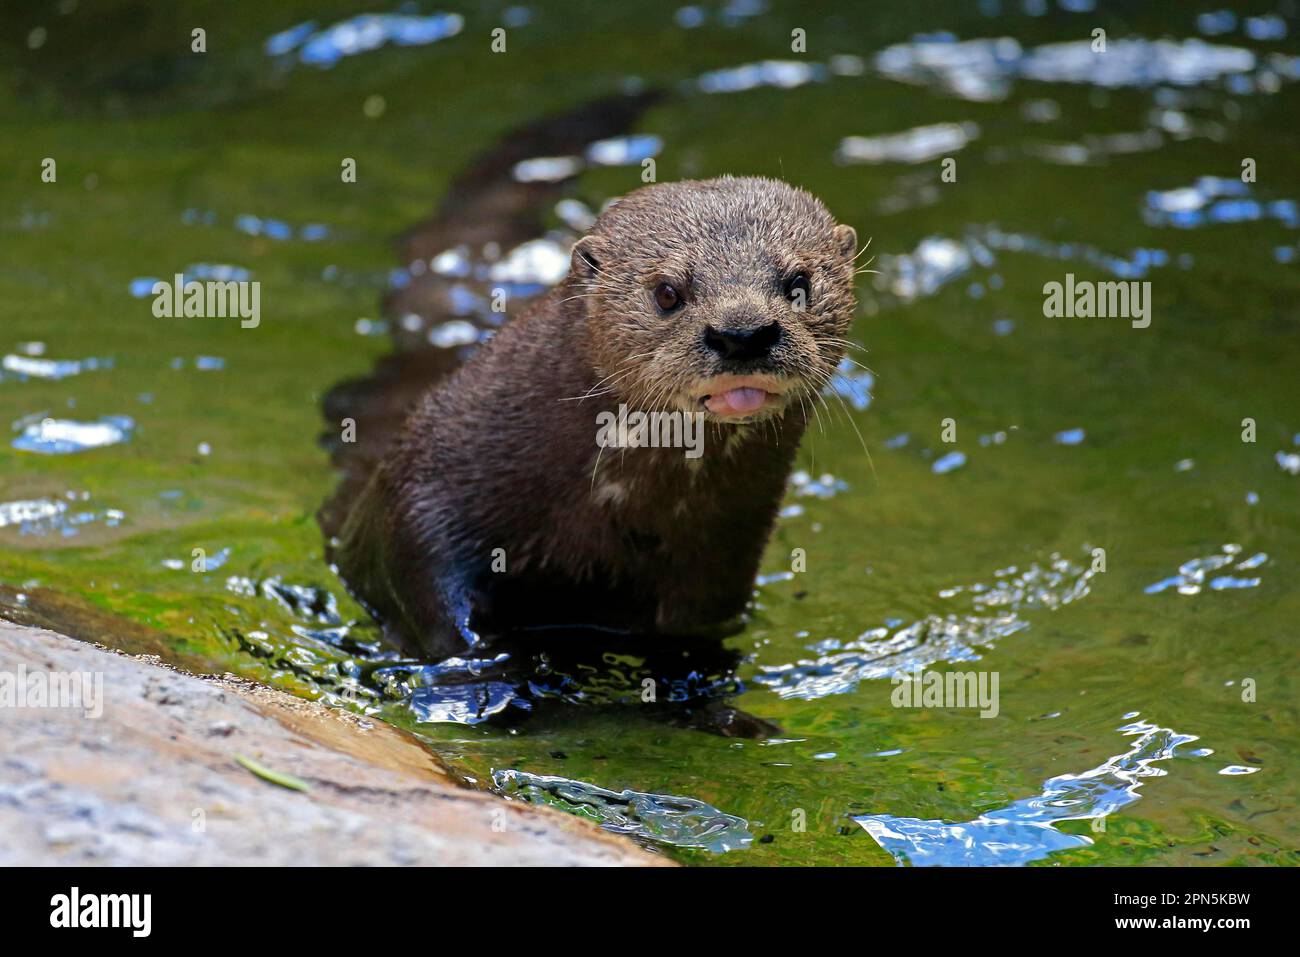 Spotted-necked otter (Hydrictis maculicollis) adult, standing in shallow water, Eastern Cape, South Africa, December (in captivity) Stock Photo